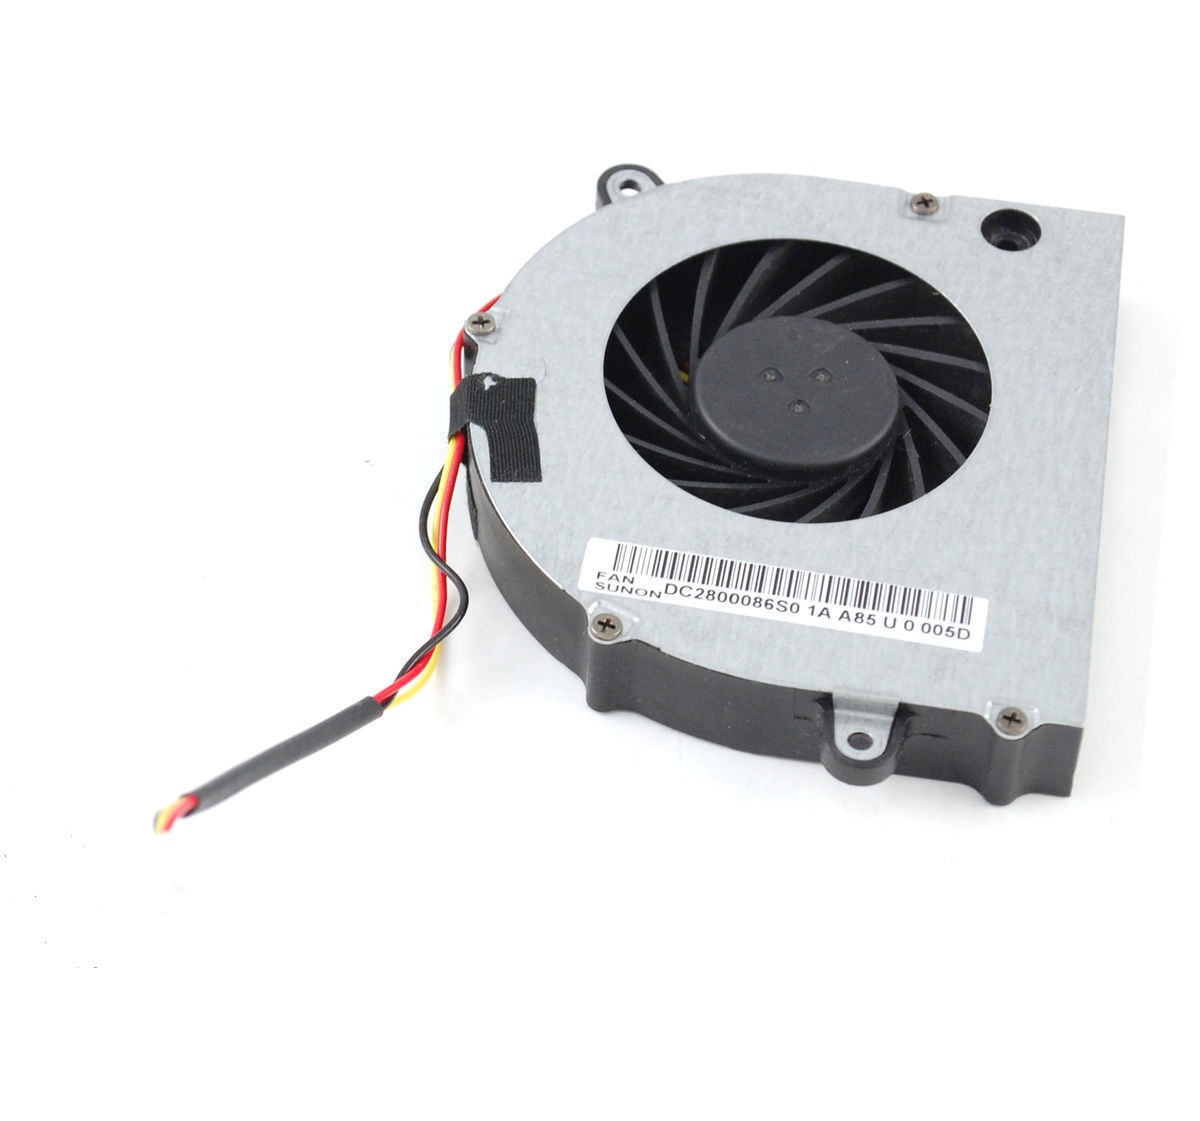 Lenovo Essential G780 Cooling Fan DC28000AIA0